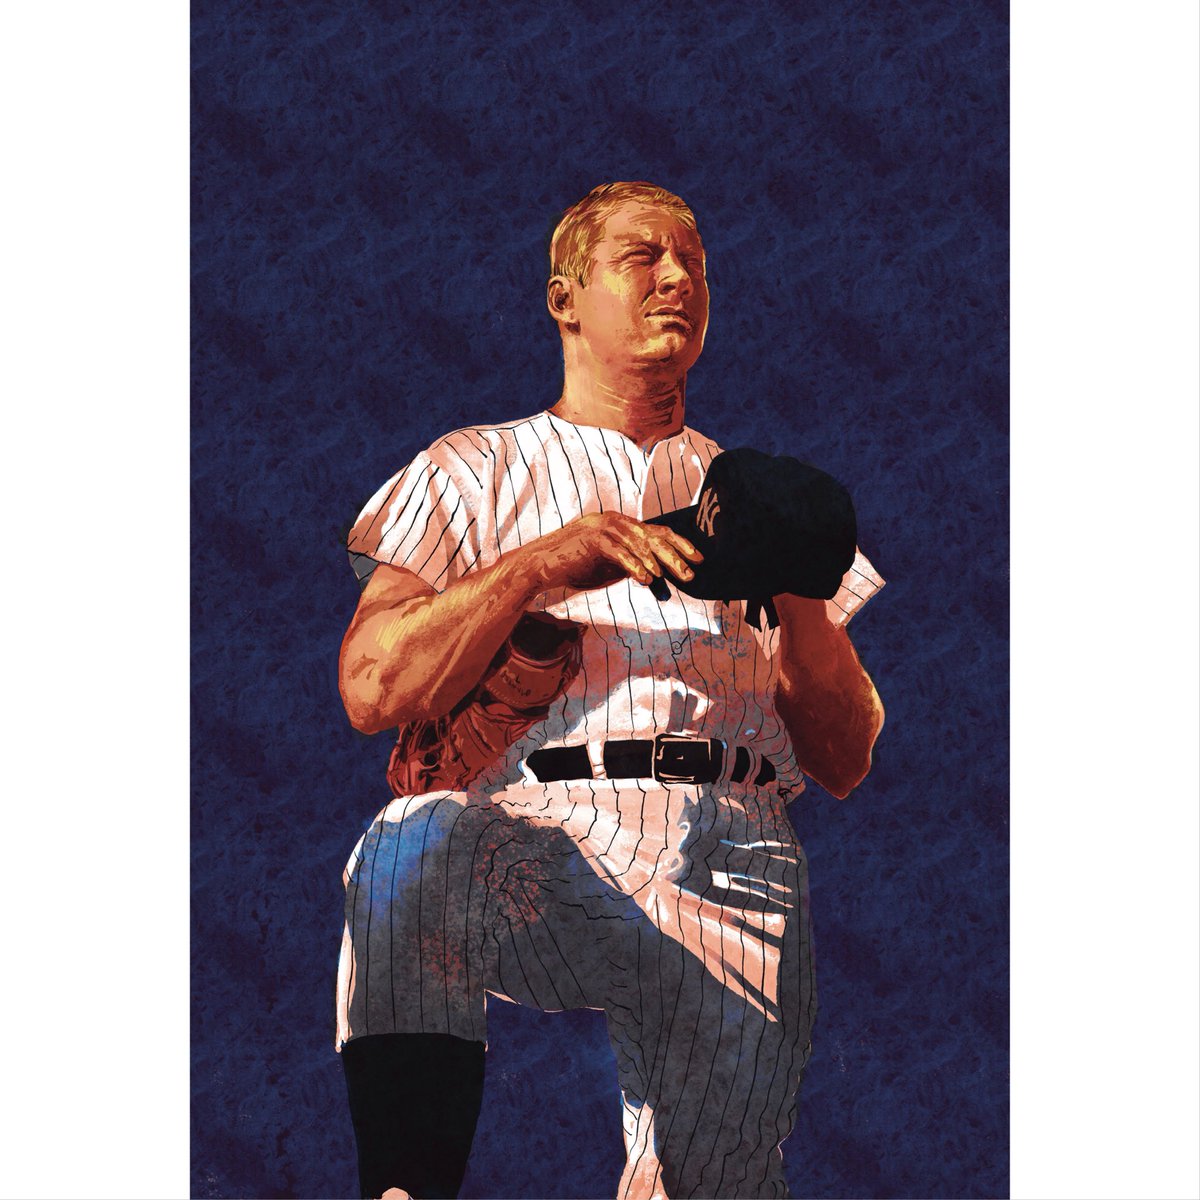 This Day in Baseball History: May 1, 1951 - On Mother’s Day, Mickey Mantle hits the first home run of his career off Randy Gumpert in an 8 - 3 victory over the Chicago White Sox at Comiskey Park.
.
.
.
#tripleplaydesign #mantle #tpdtradingcards #design #mickeymantle